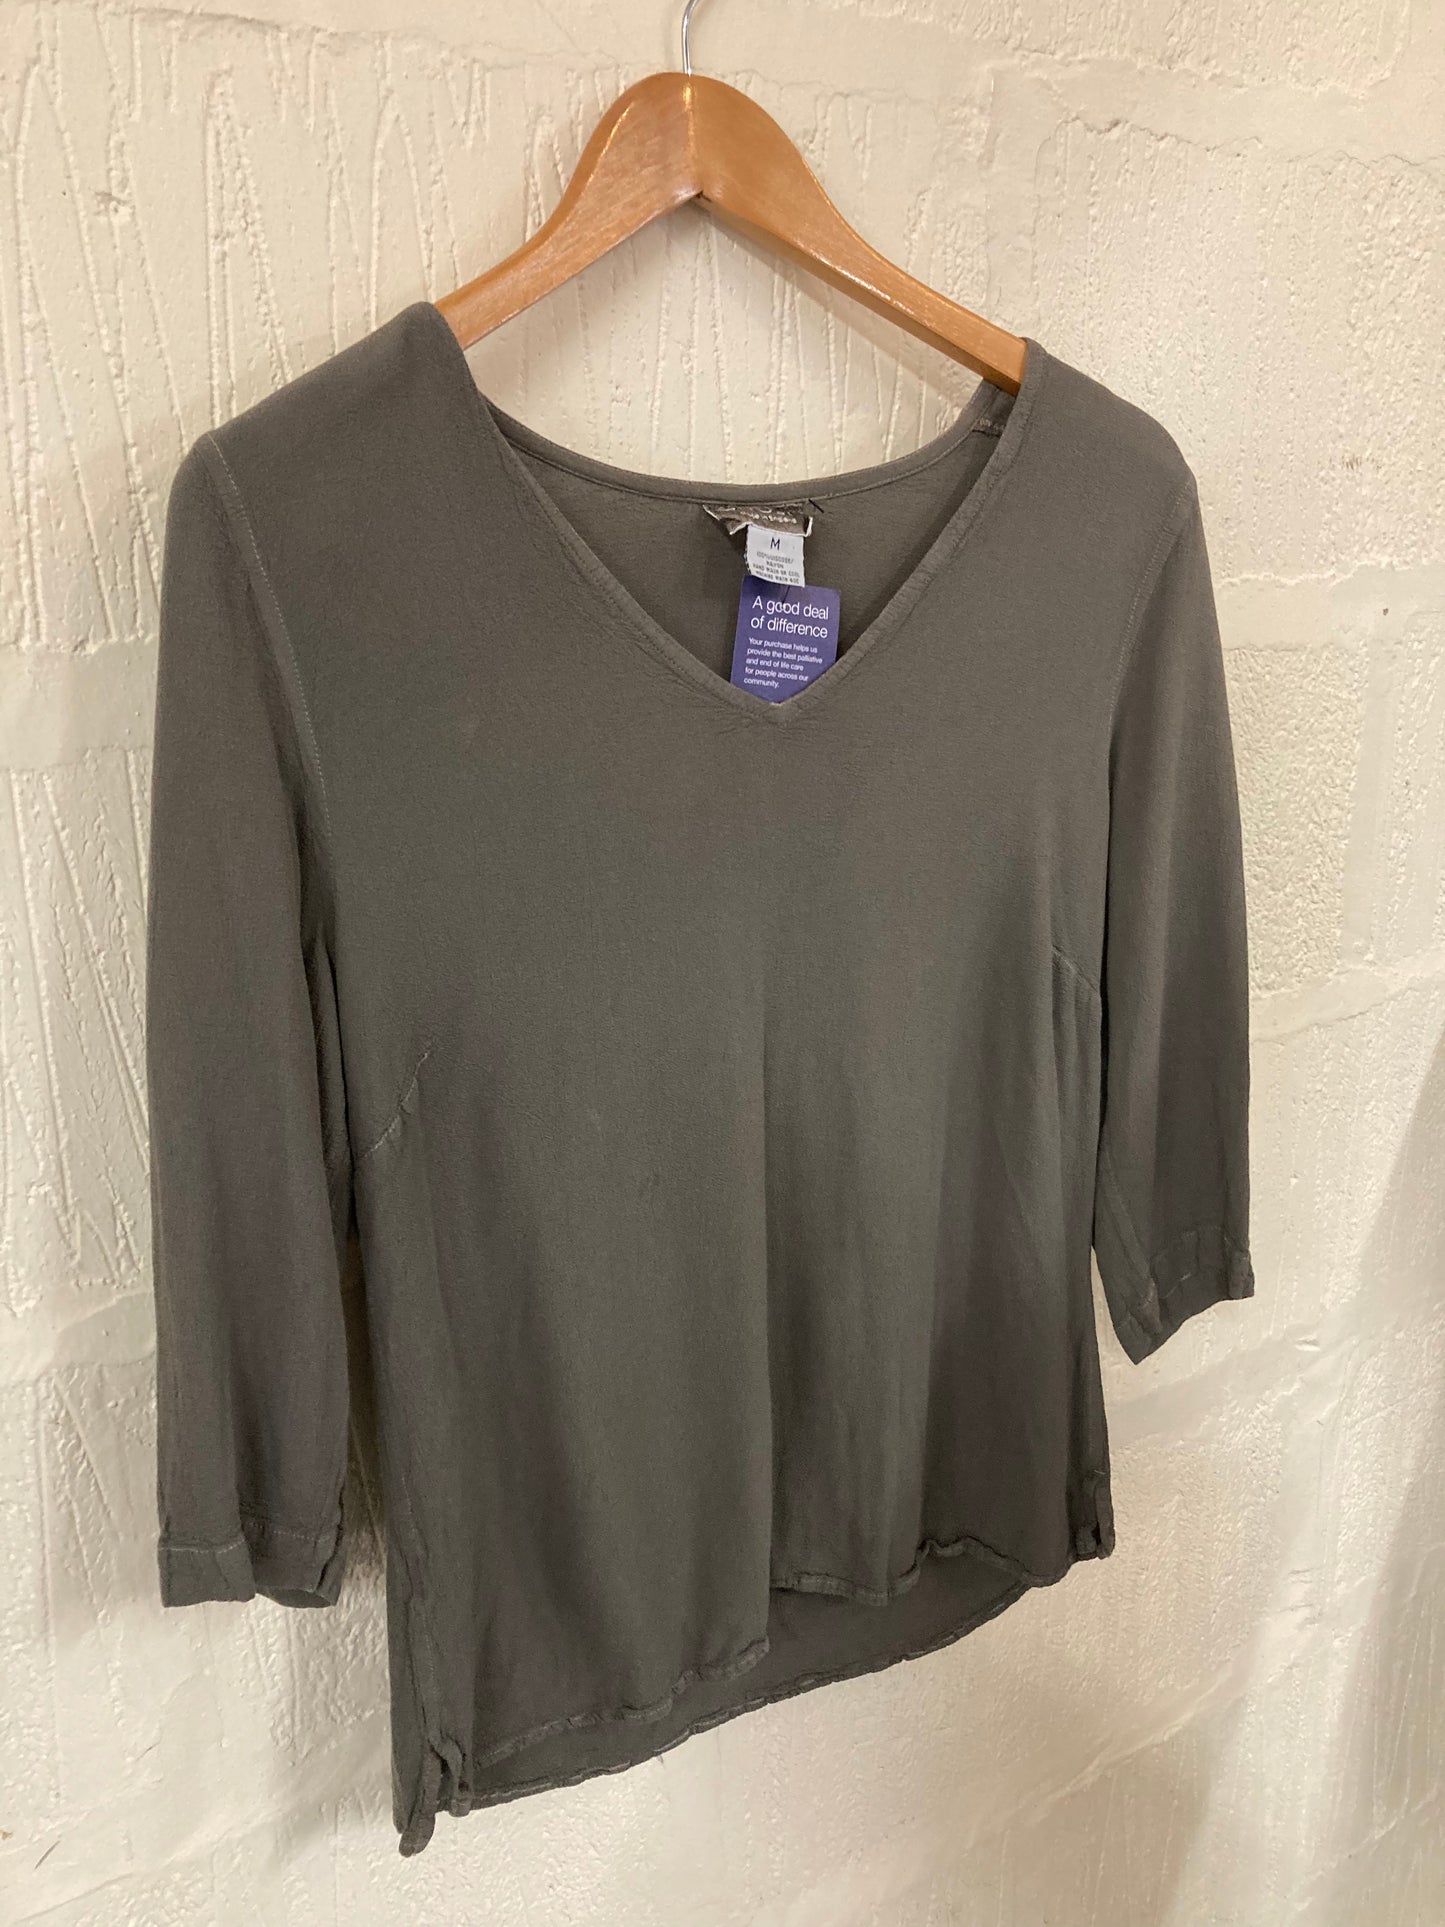 Vintage Ghost Khaki Grey Ghost Top Size 8